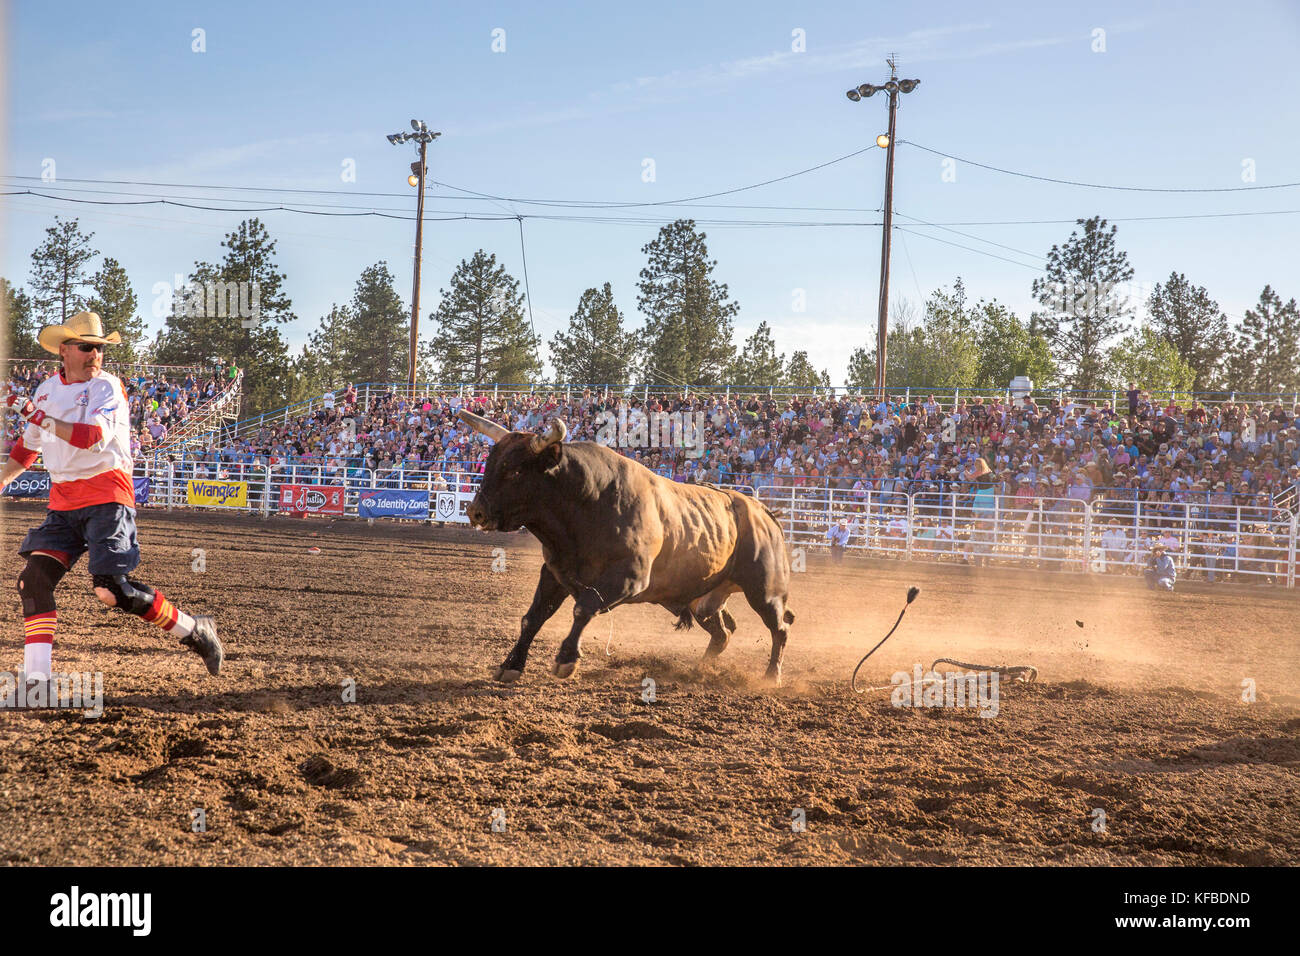 USA, Oregon, Sisters, Sisters Rodeo, cowboys ride a 2,000 pound bull